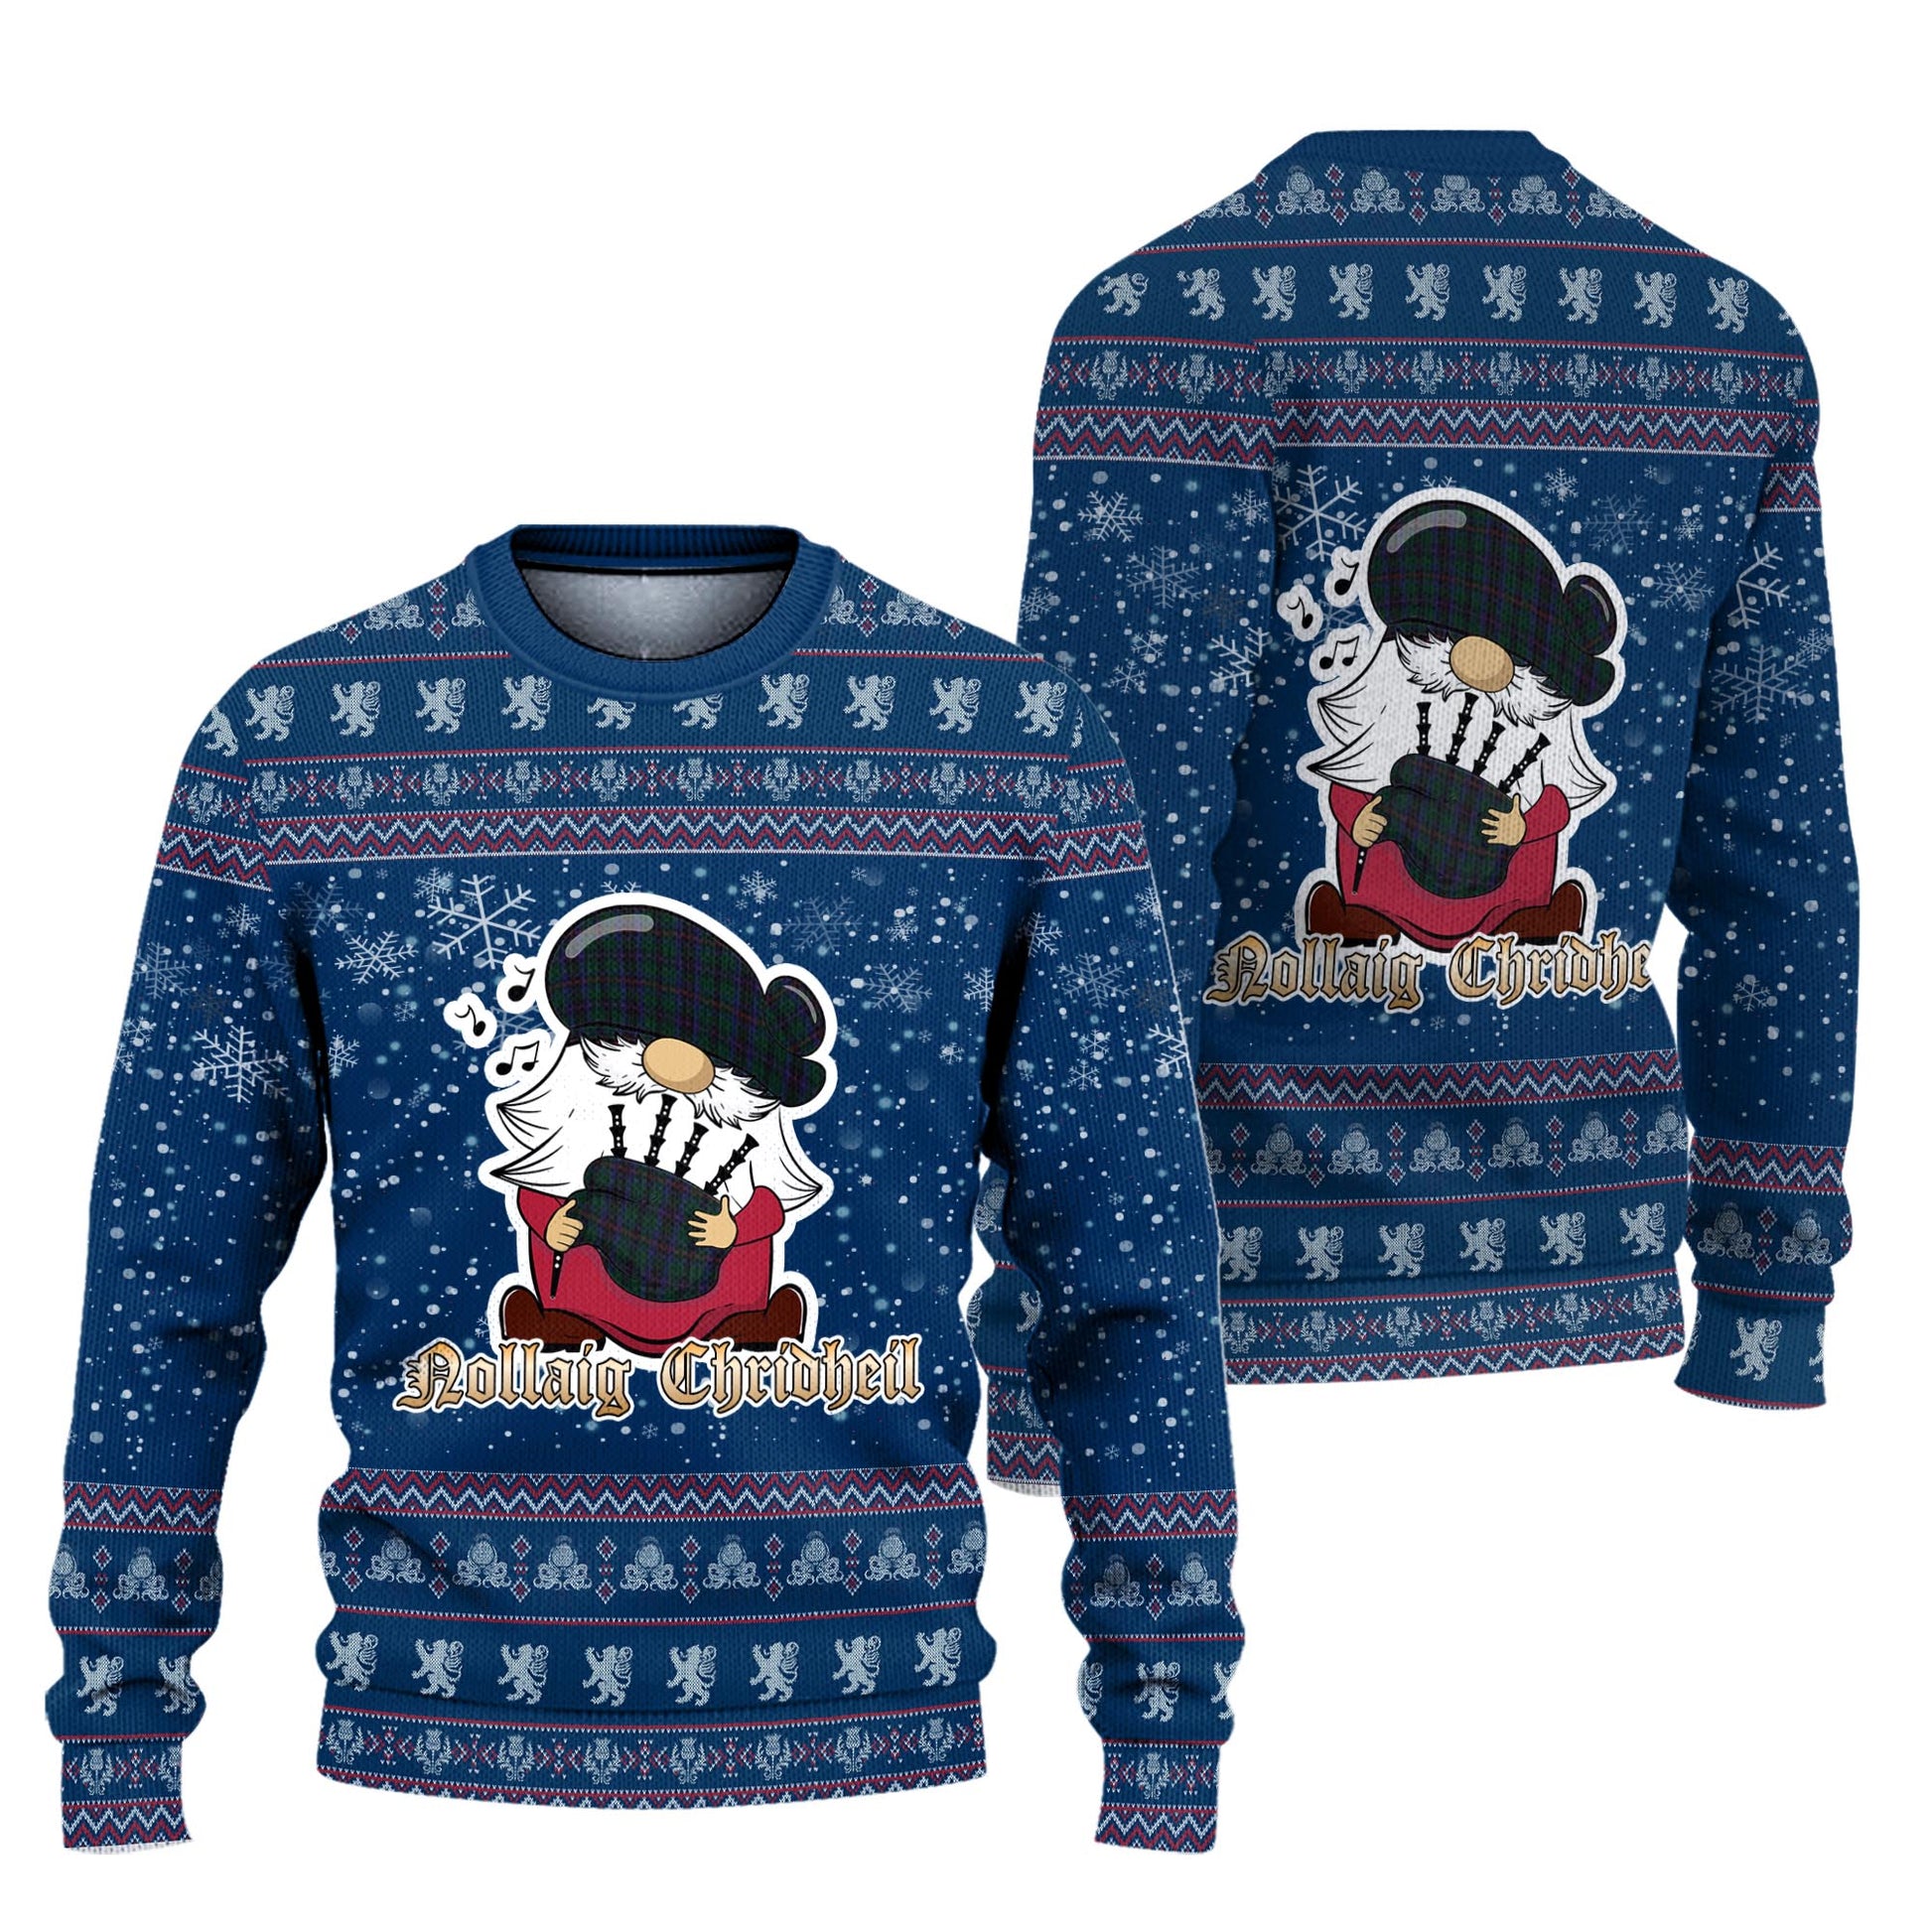 Phillips of Wales Clan Christmas Family Knitted Sweater with Funny Gnome Playing Bagpipes Unisex Blue - Tartanvibesclothing